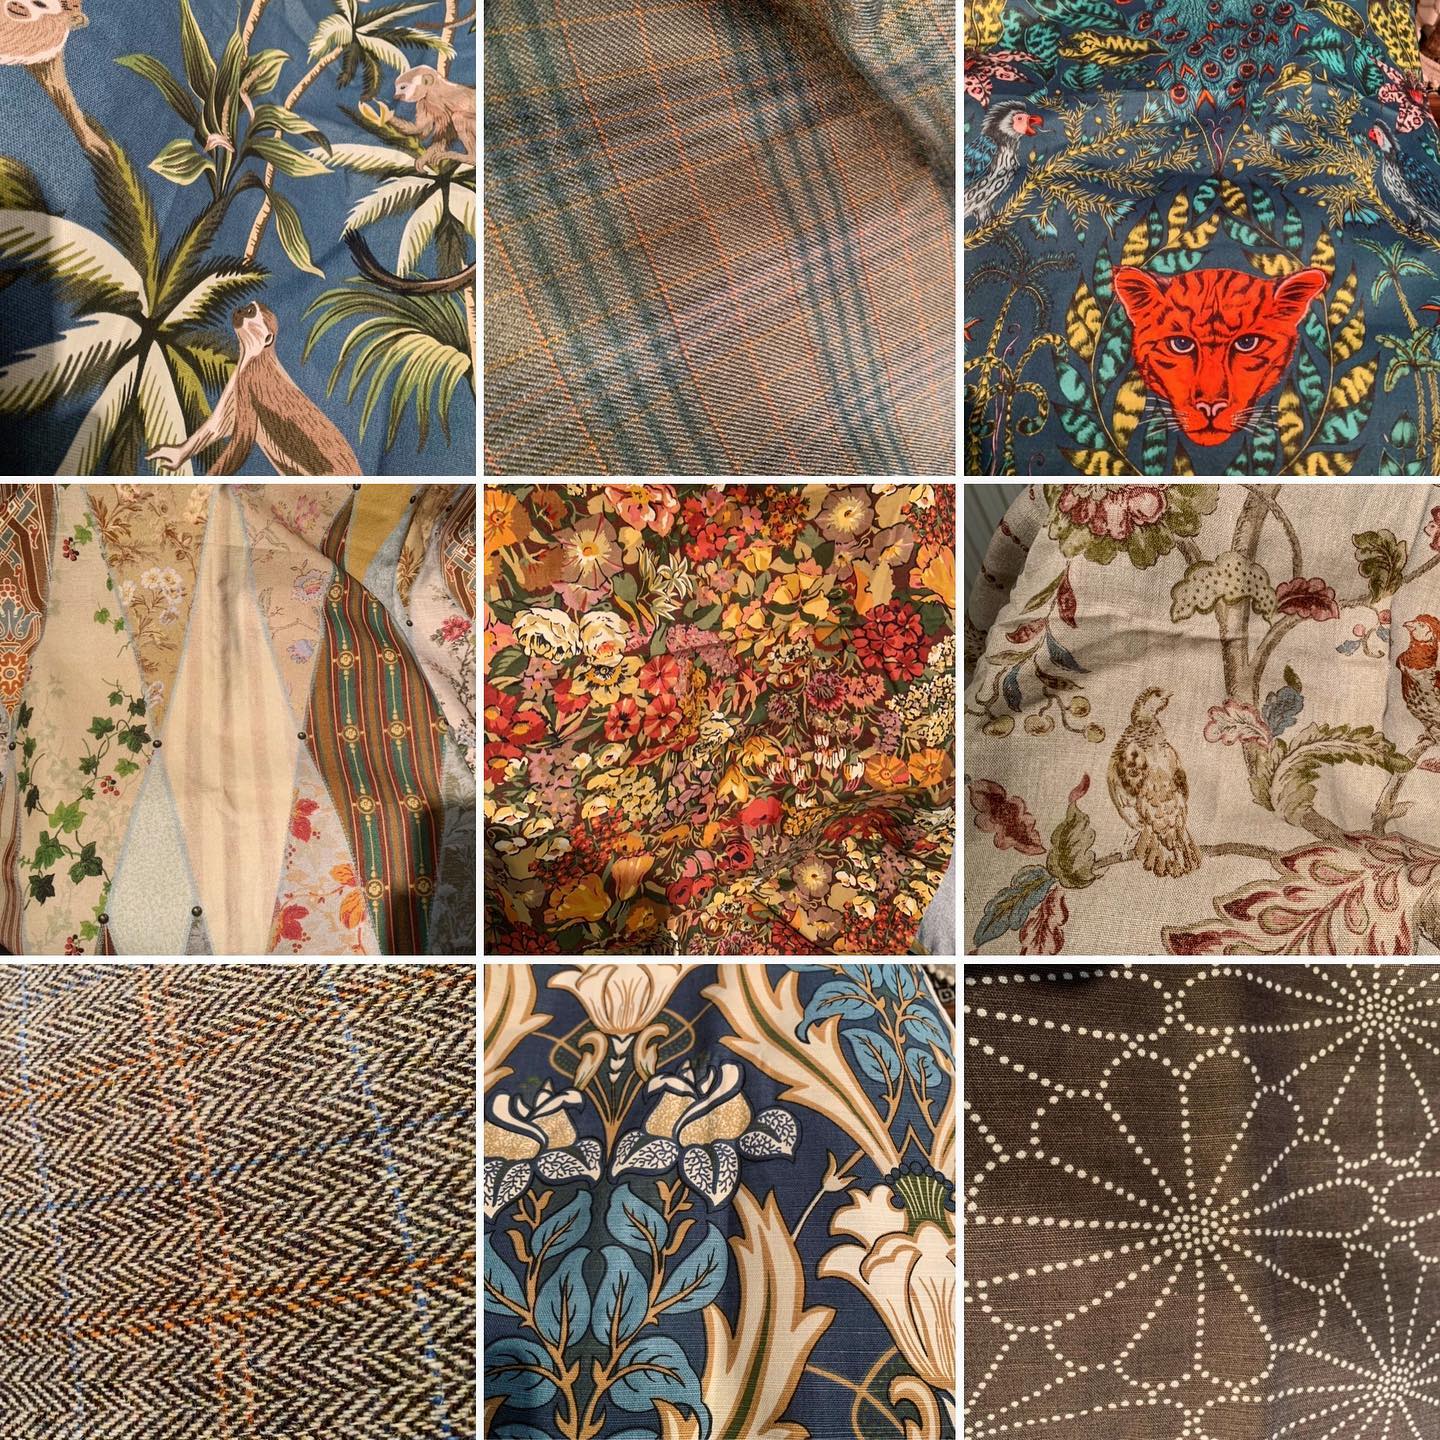 Some popular prints as we head into spring! Rich blues and warm natural tones ...#lovelyfabrics #spring #print #textiles #style #design #homewares